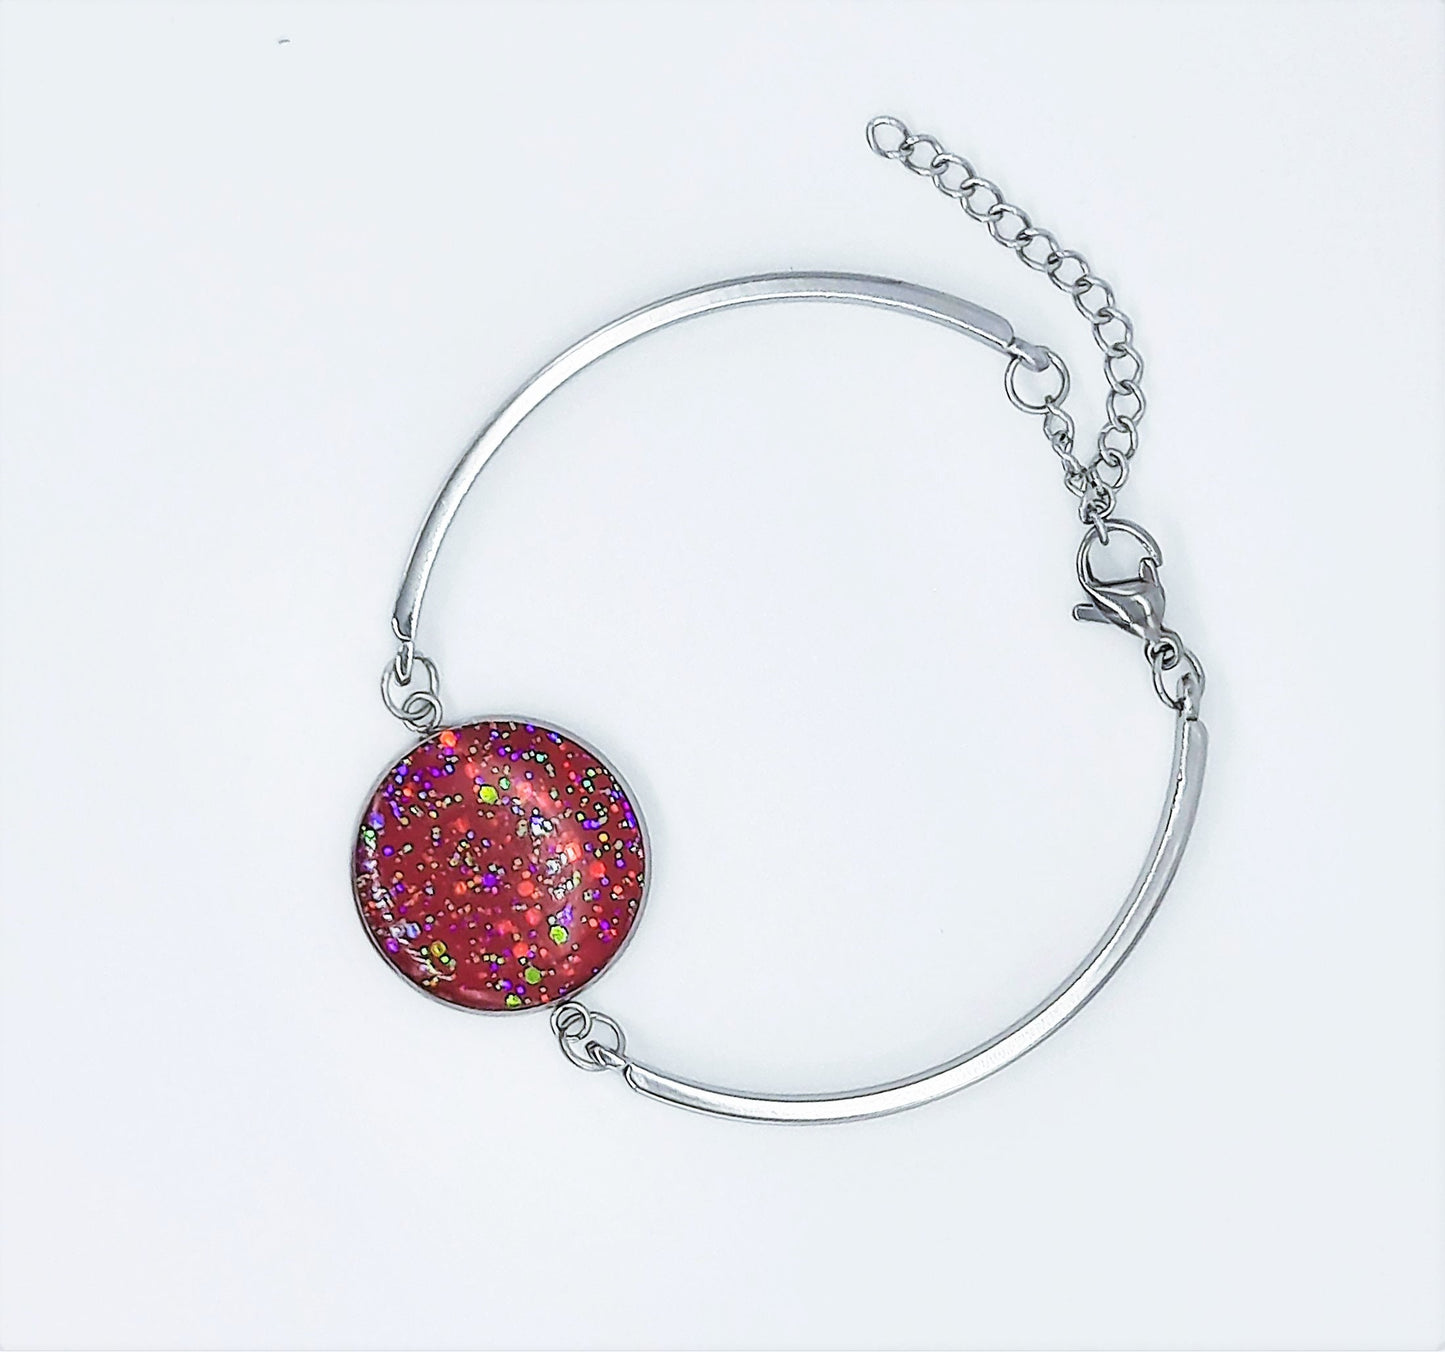 Red Sparkle Resin Bangle Bracelet / Adjustable / Made with Resin, Mica, Glitter, and Hypoallergenic Stainless Steel